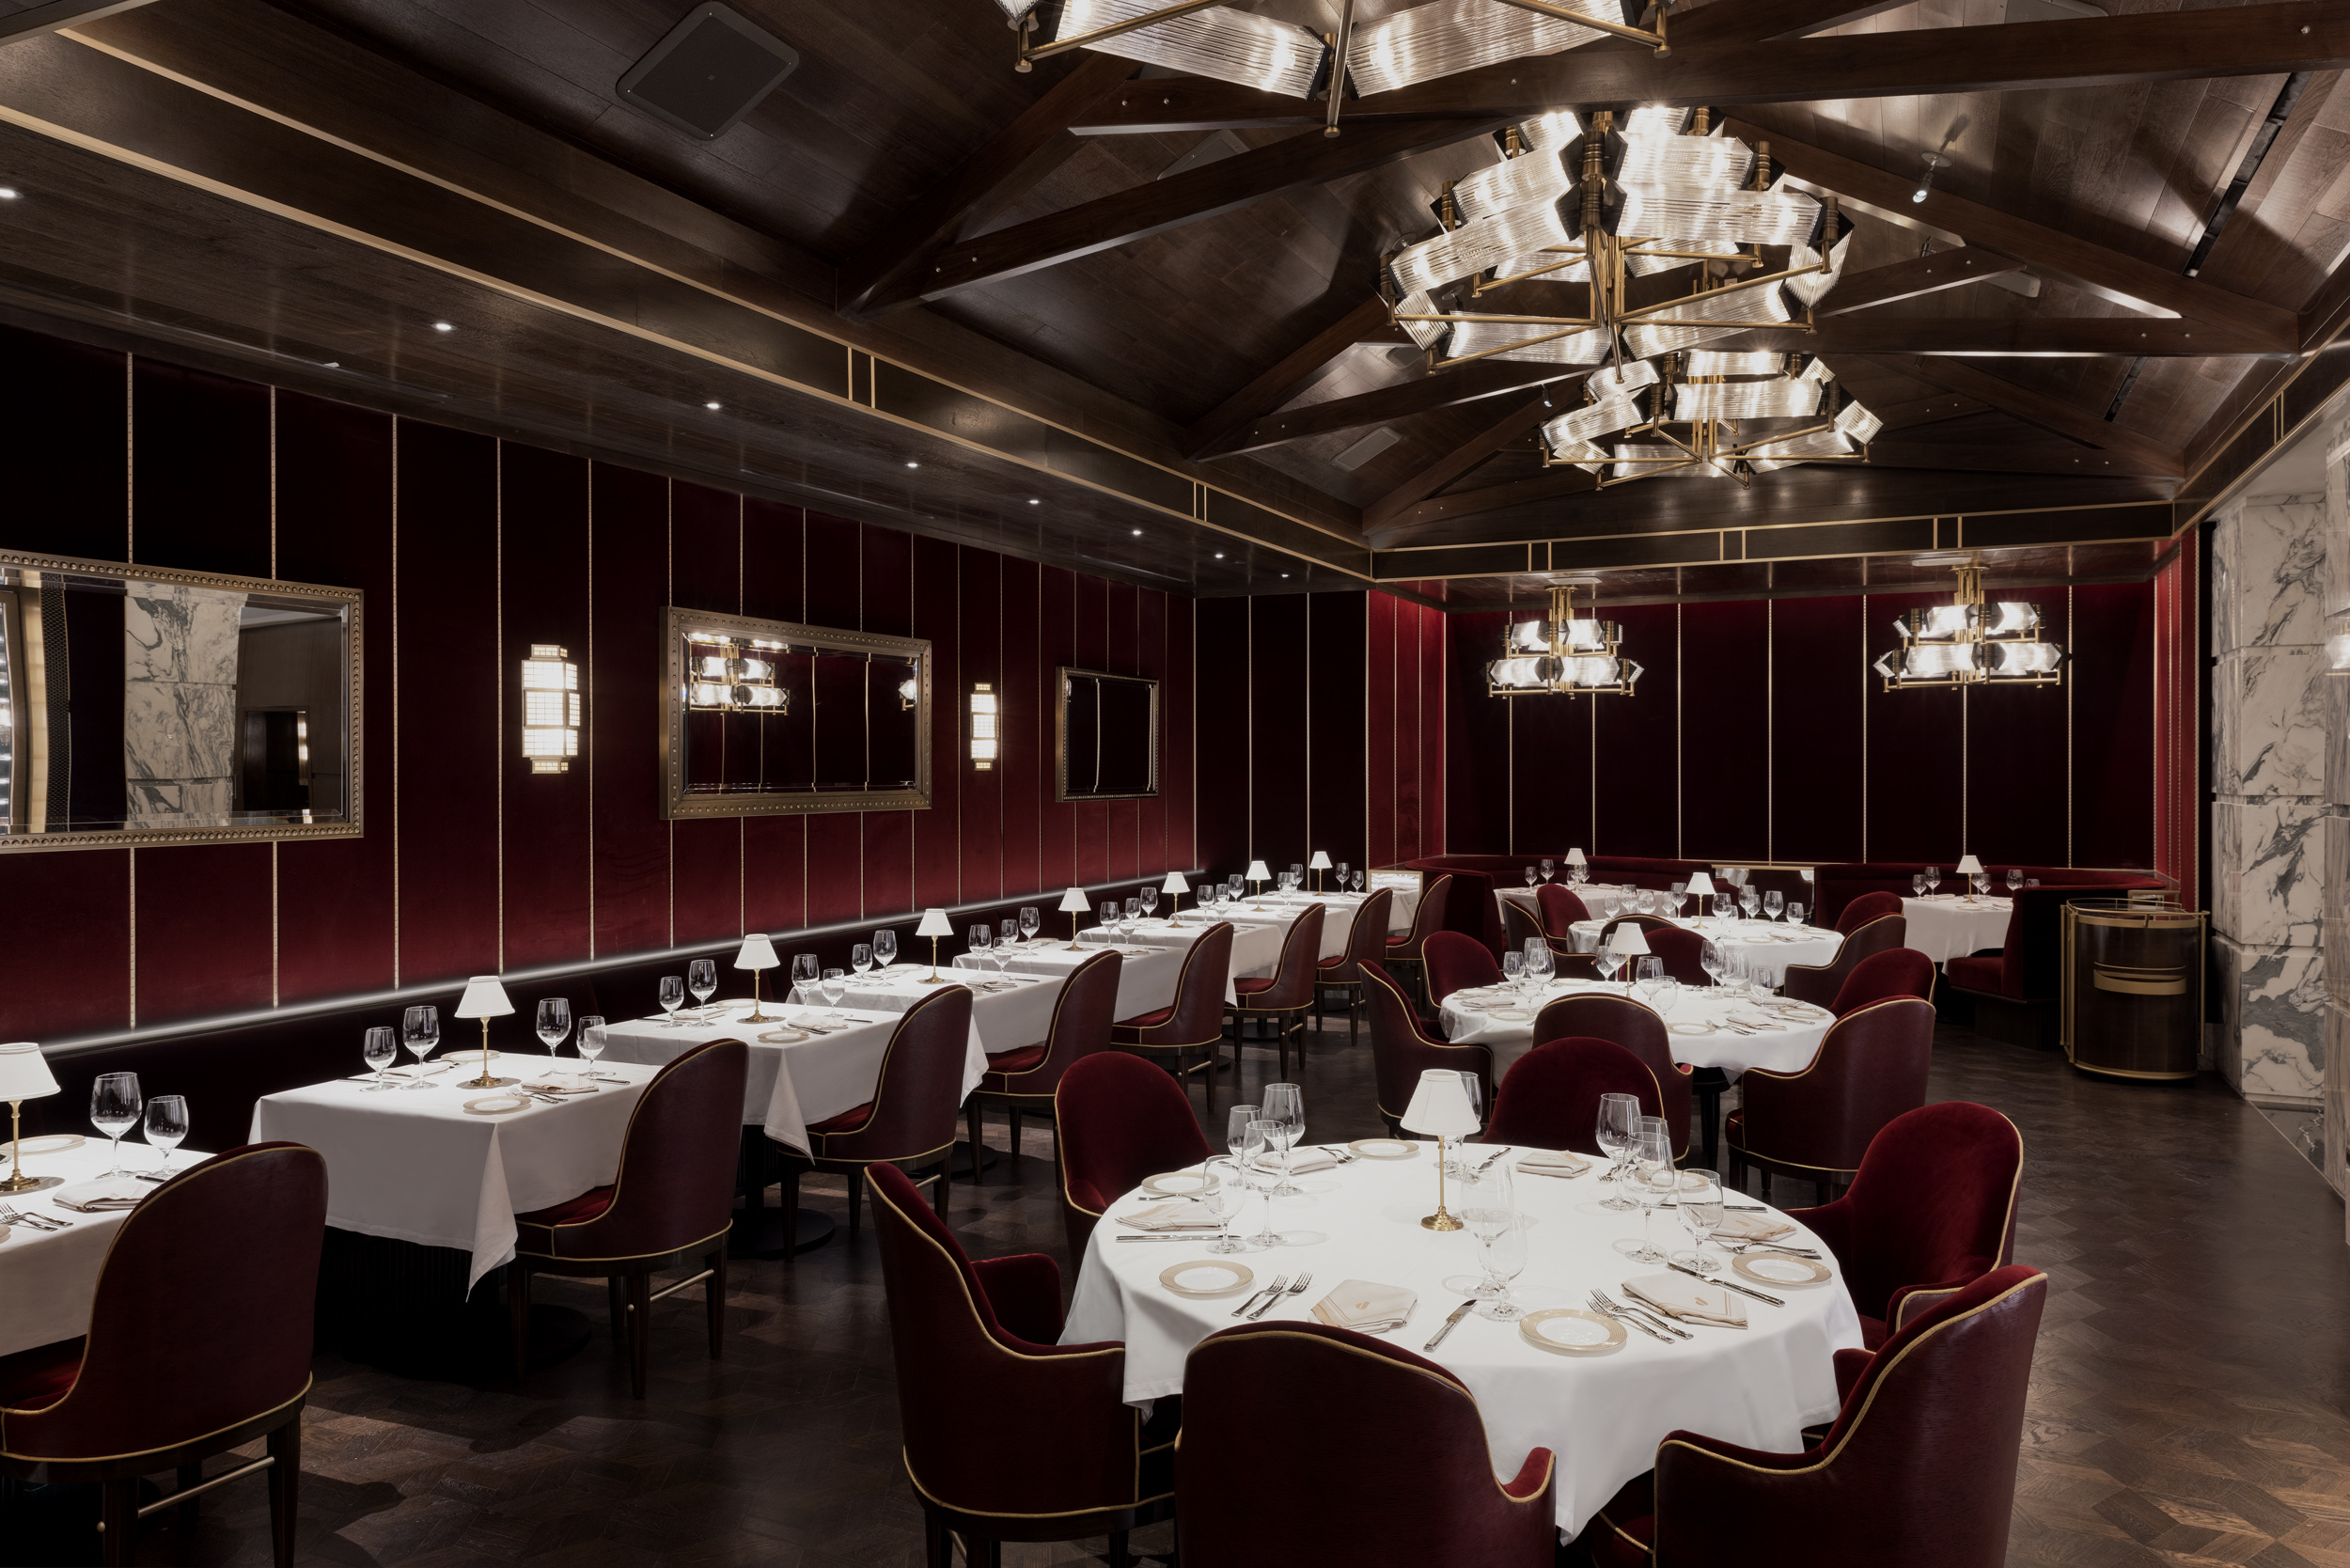 Image of the dining room at Don's Prime steakhouse.